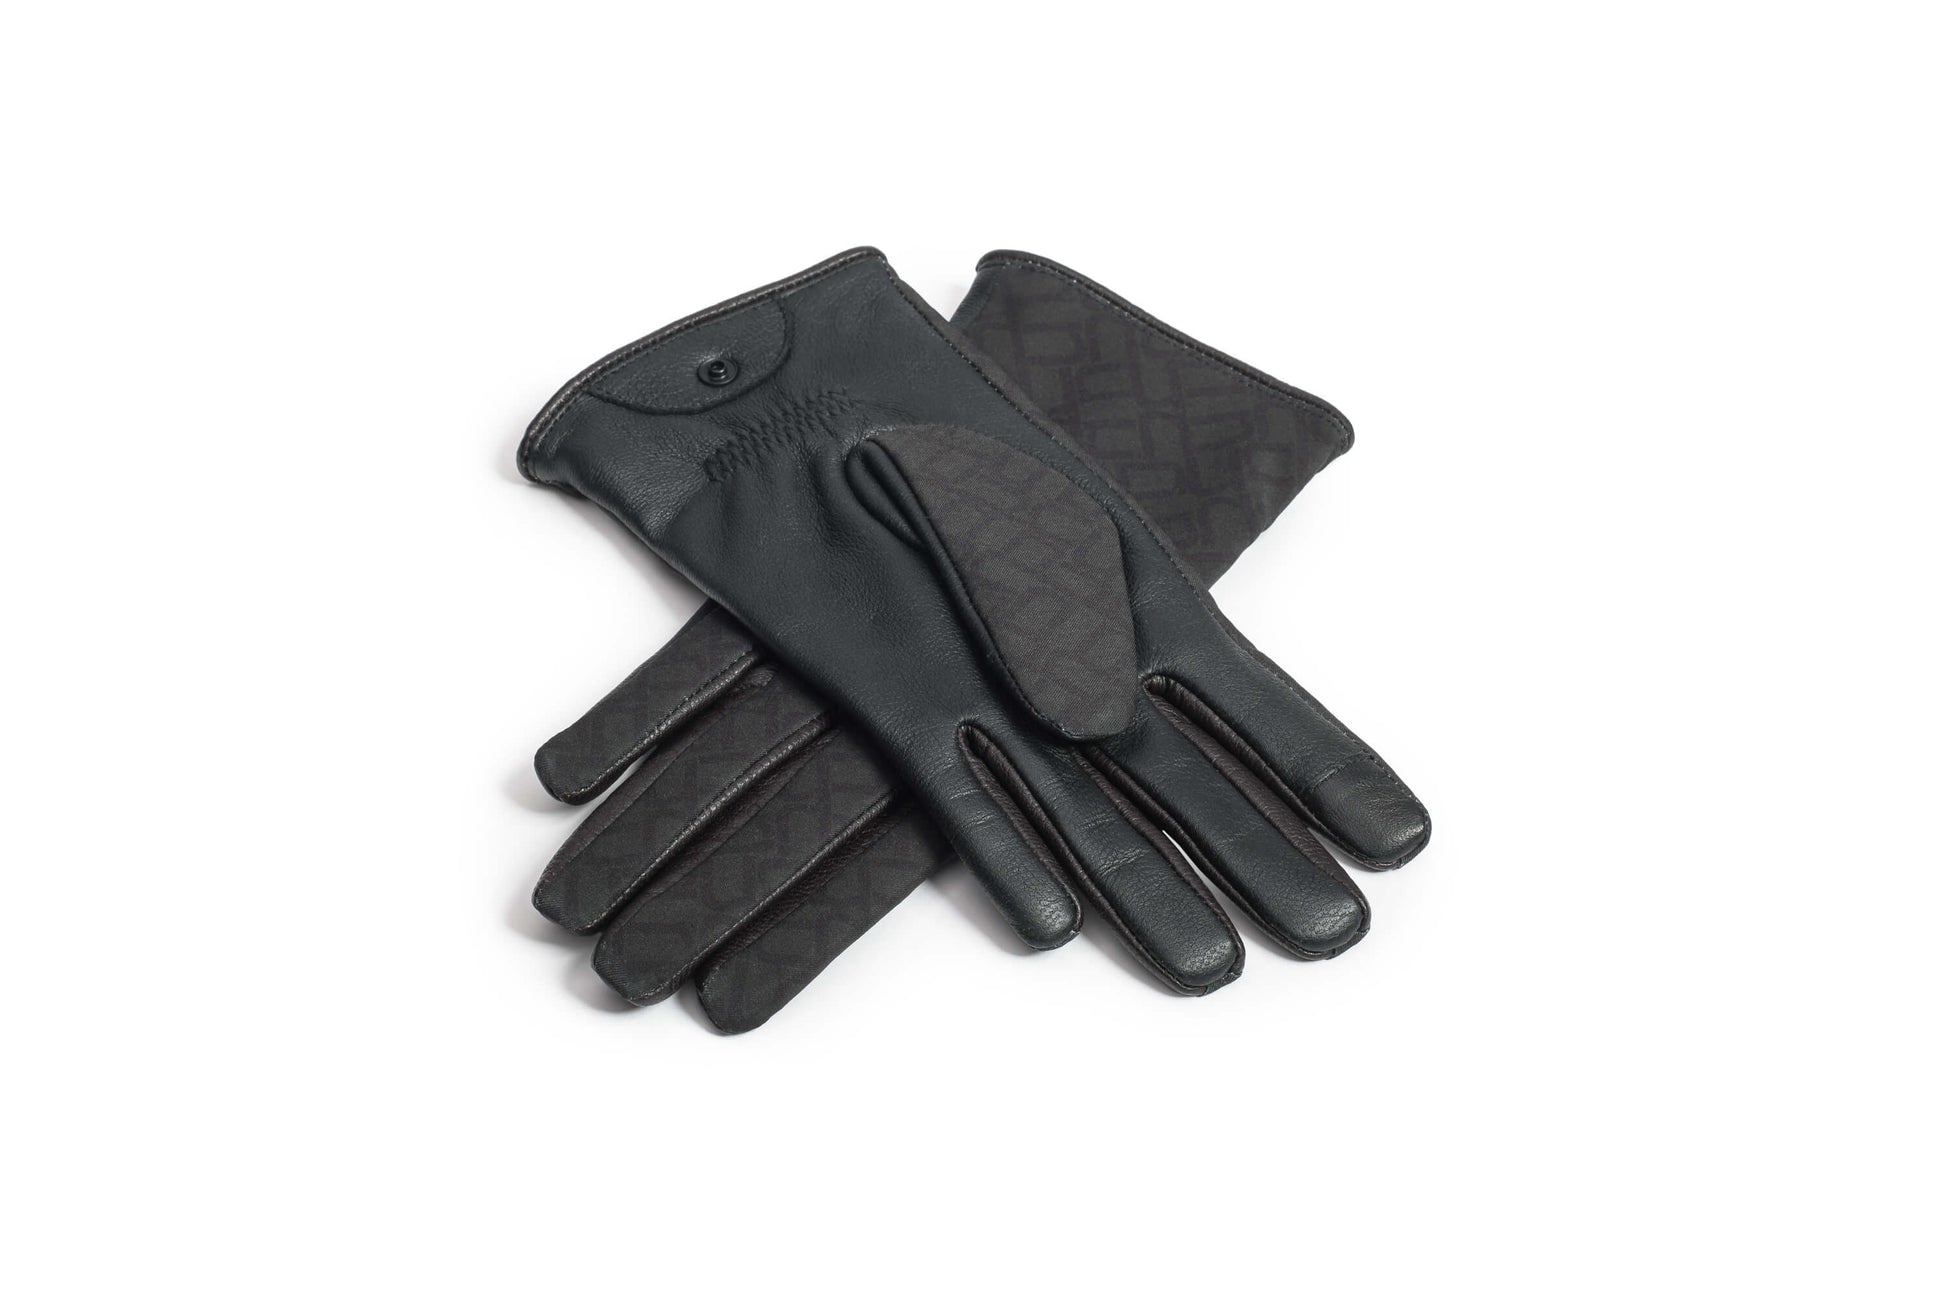 Mai Ladies Classic Driving Gloves with lambskin exterior, cashmere lining, touch screen fingertips, and elasticized wrists, in Dark Monogram